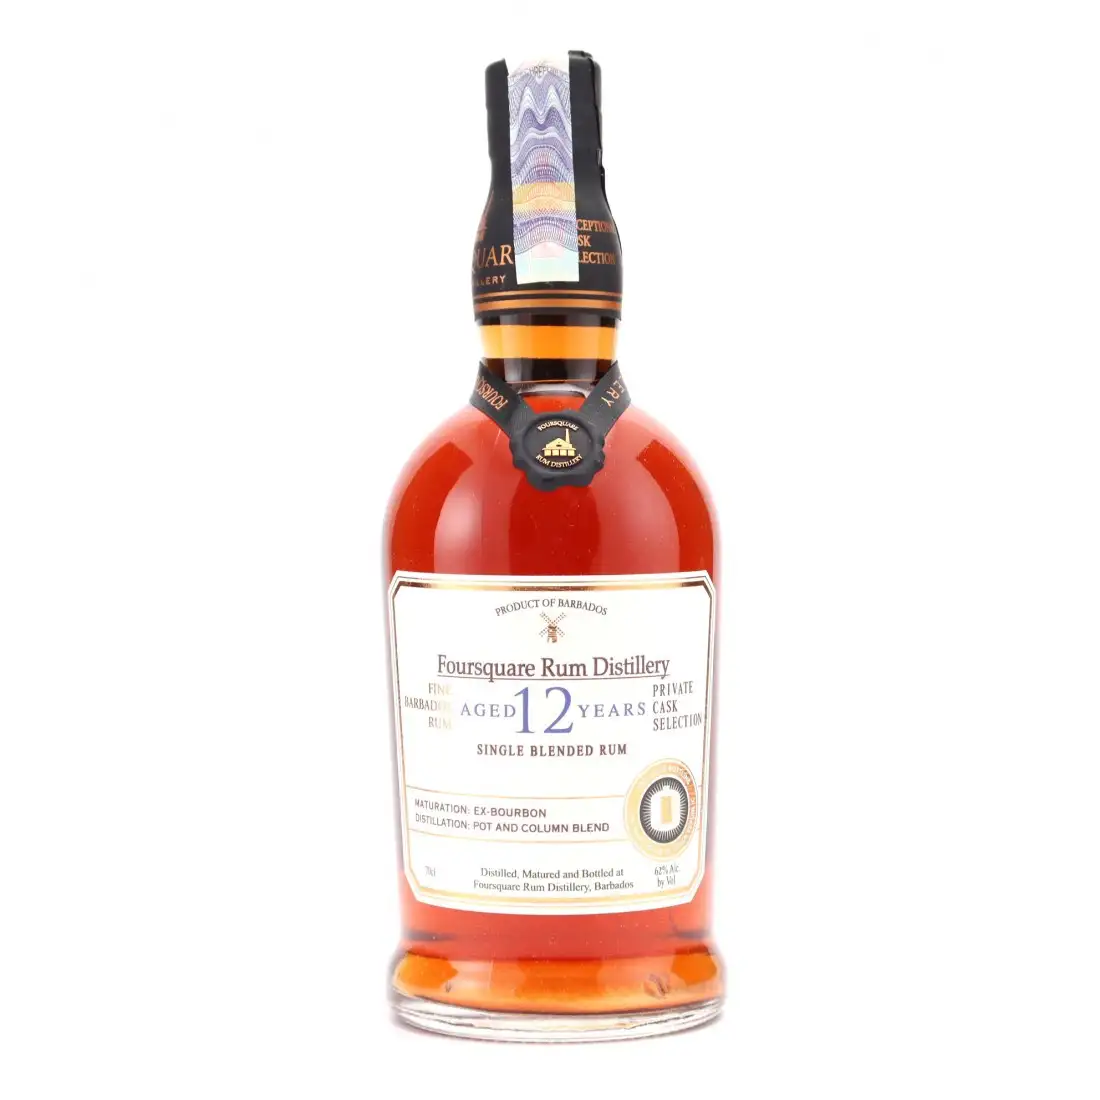 Image of the front of the bottle of the rum Private Cask Selection (Warehouse #1)